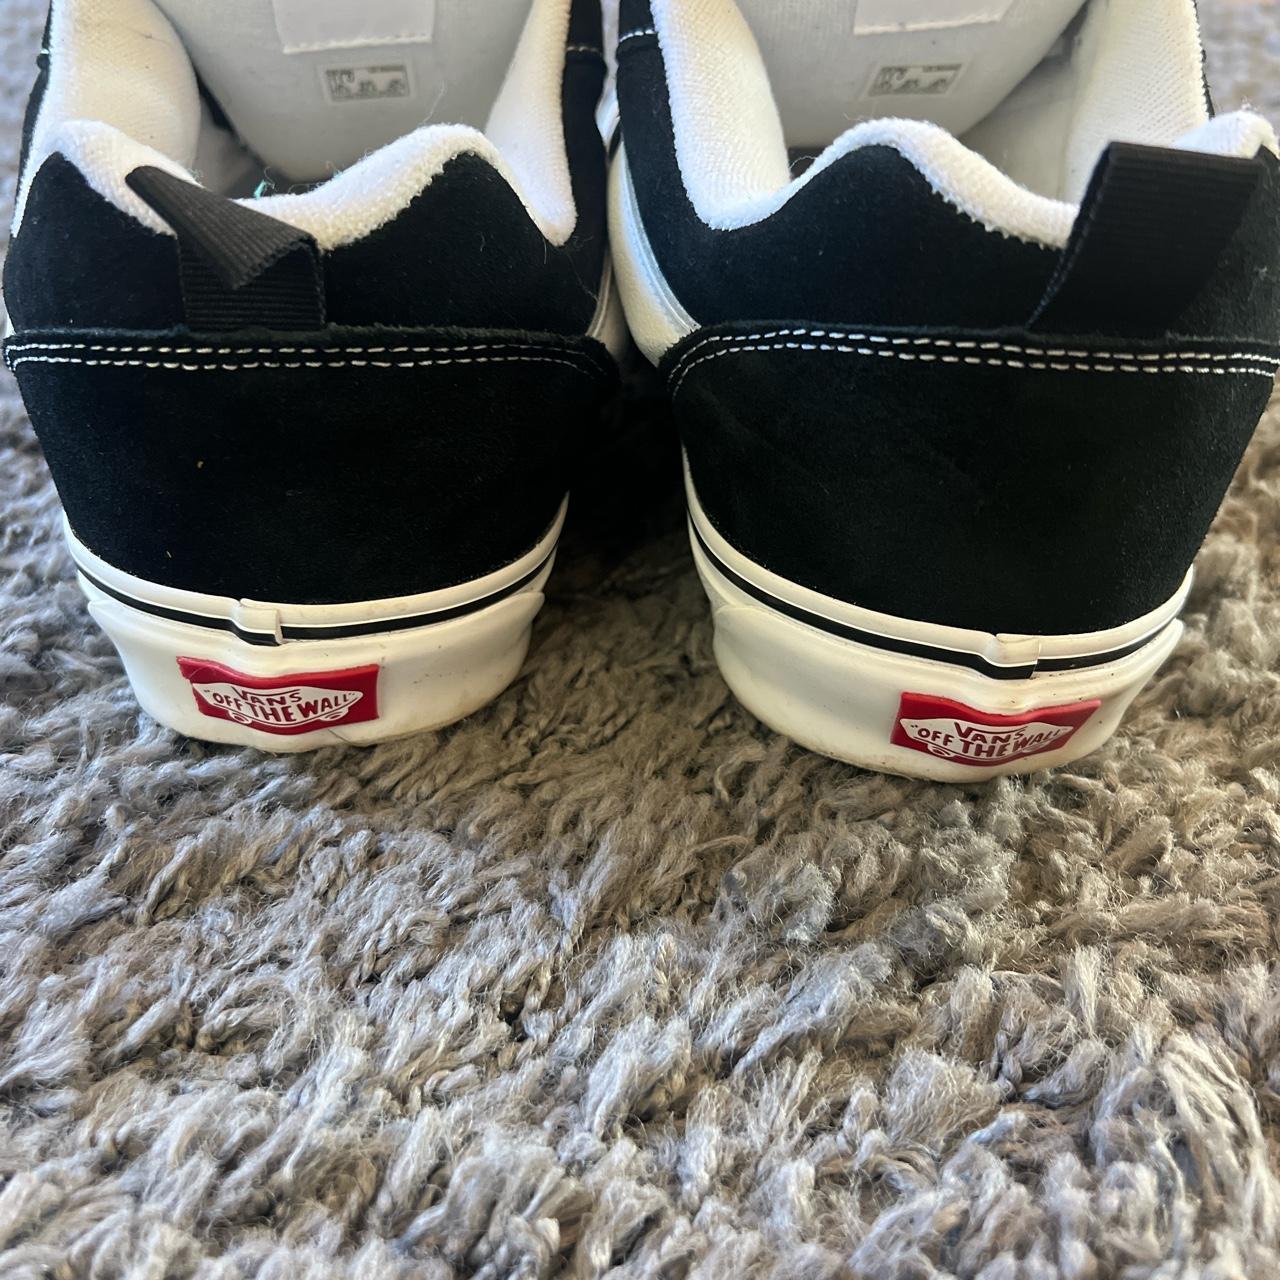 Vans knu skool Size 11 Great condition Only worn a... - Depop